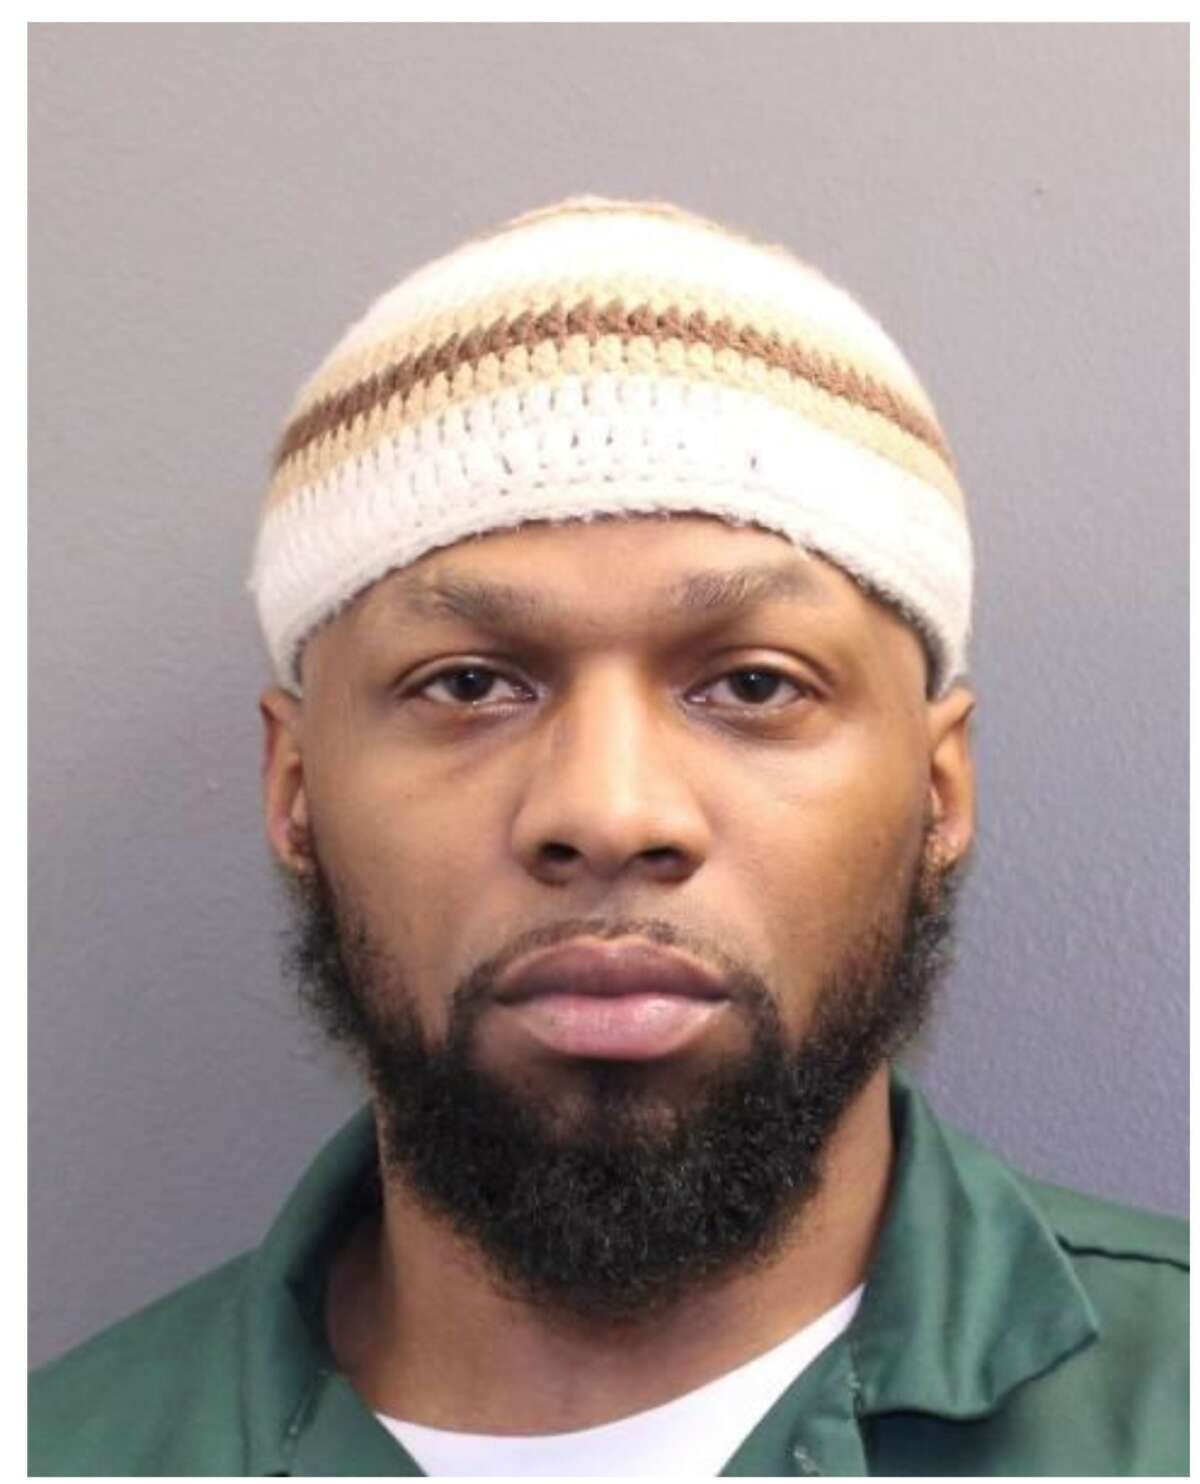 Daquan Smith, 31, was sentenced to 18 years after admitting to manslaughter in December for his role in planning the attack.      pleaded guilty Tuesday to first-degree manslaughter in the August 2020 killing of Jennifer Ostrander at her Schenectady home. 